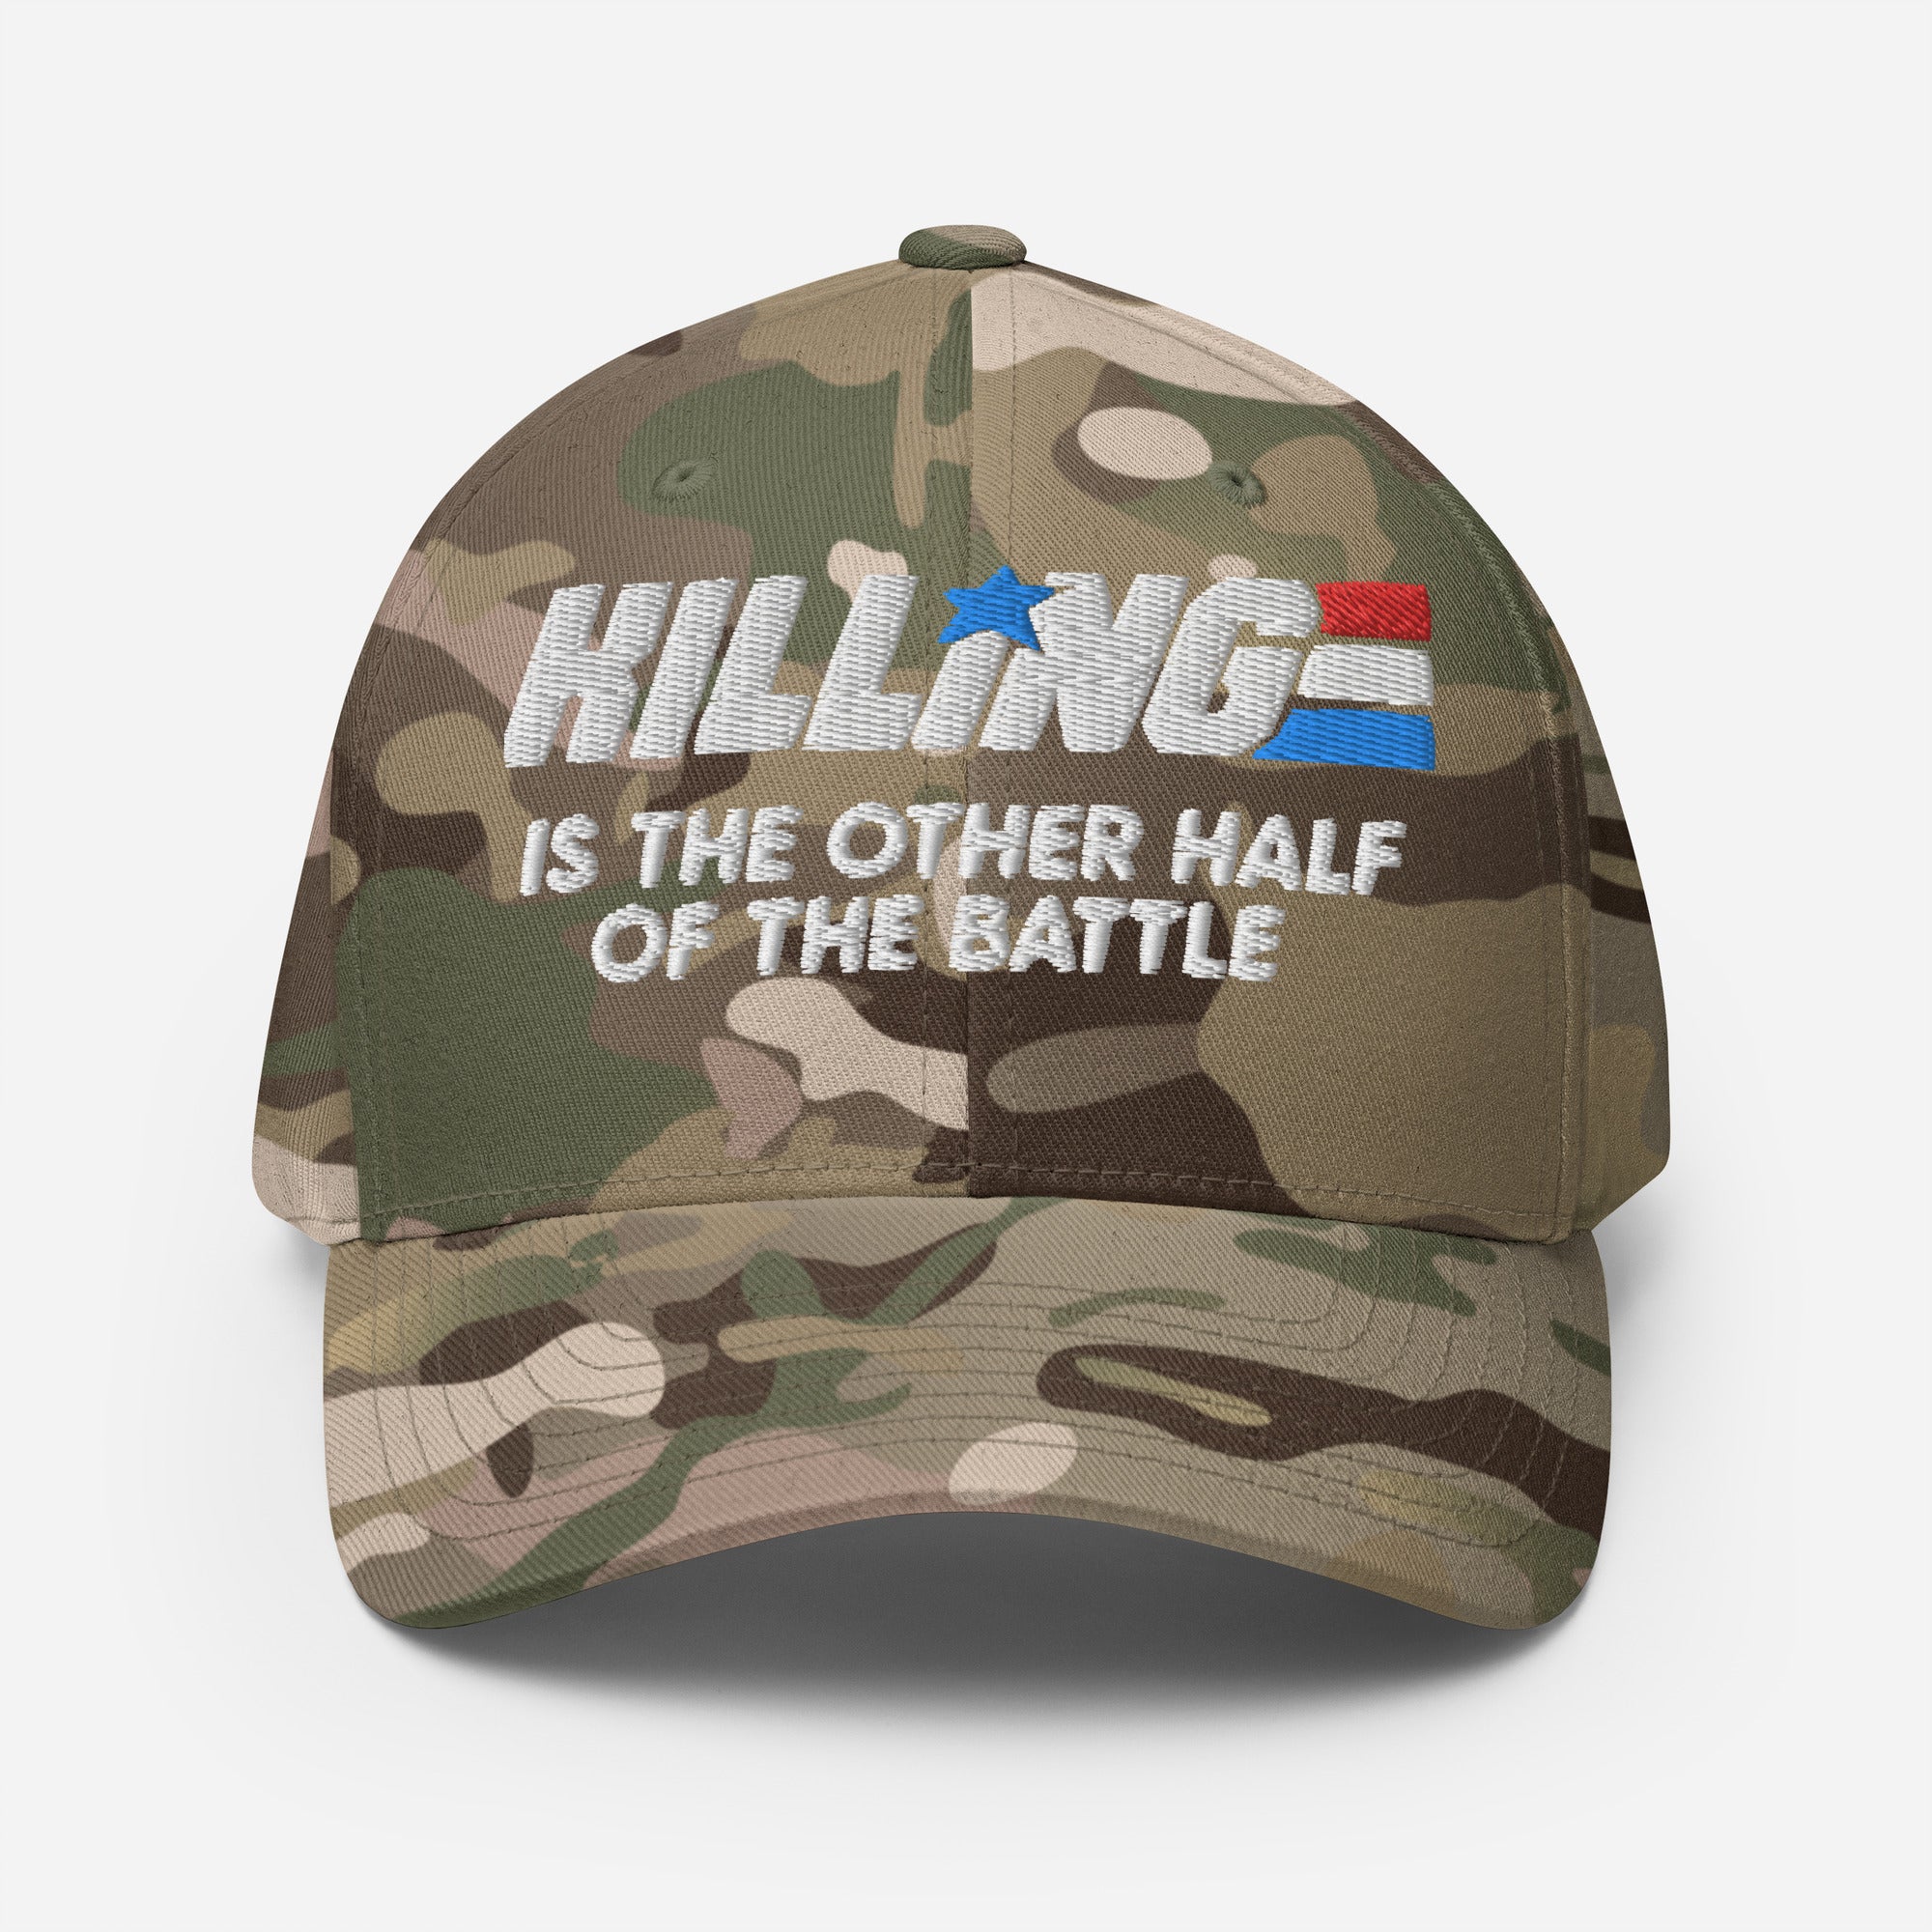 The Other Half of the Battle Flexfit Twill Cap